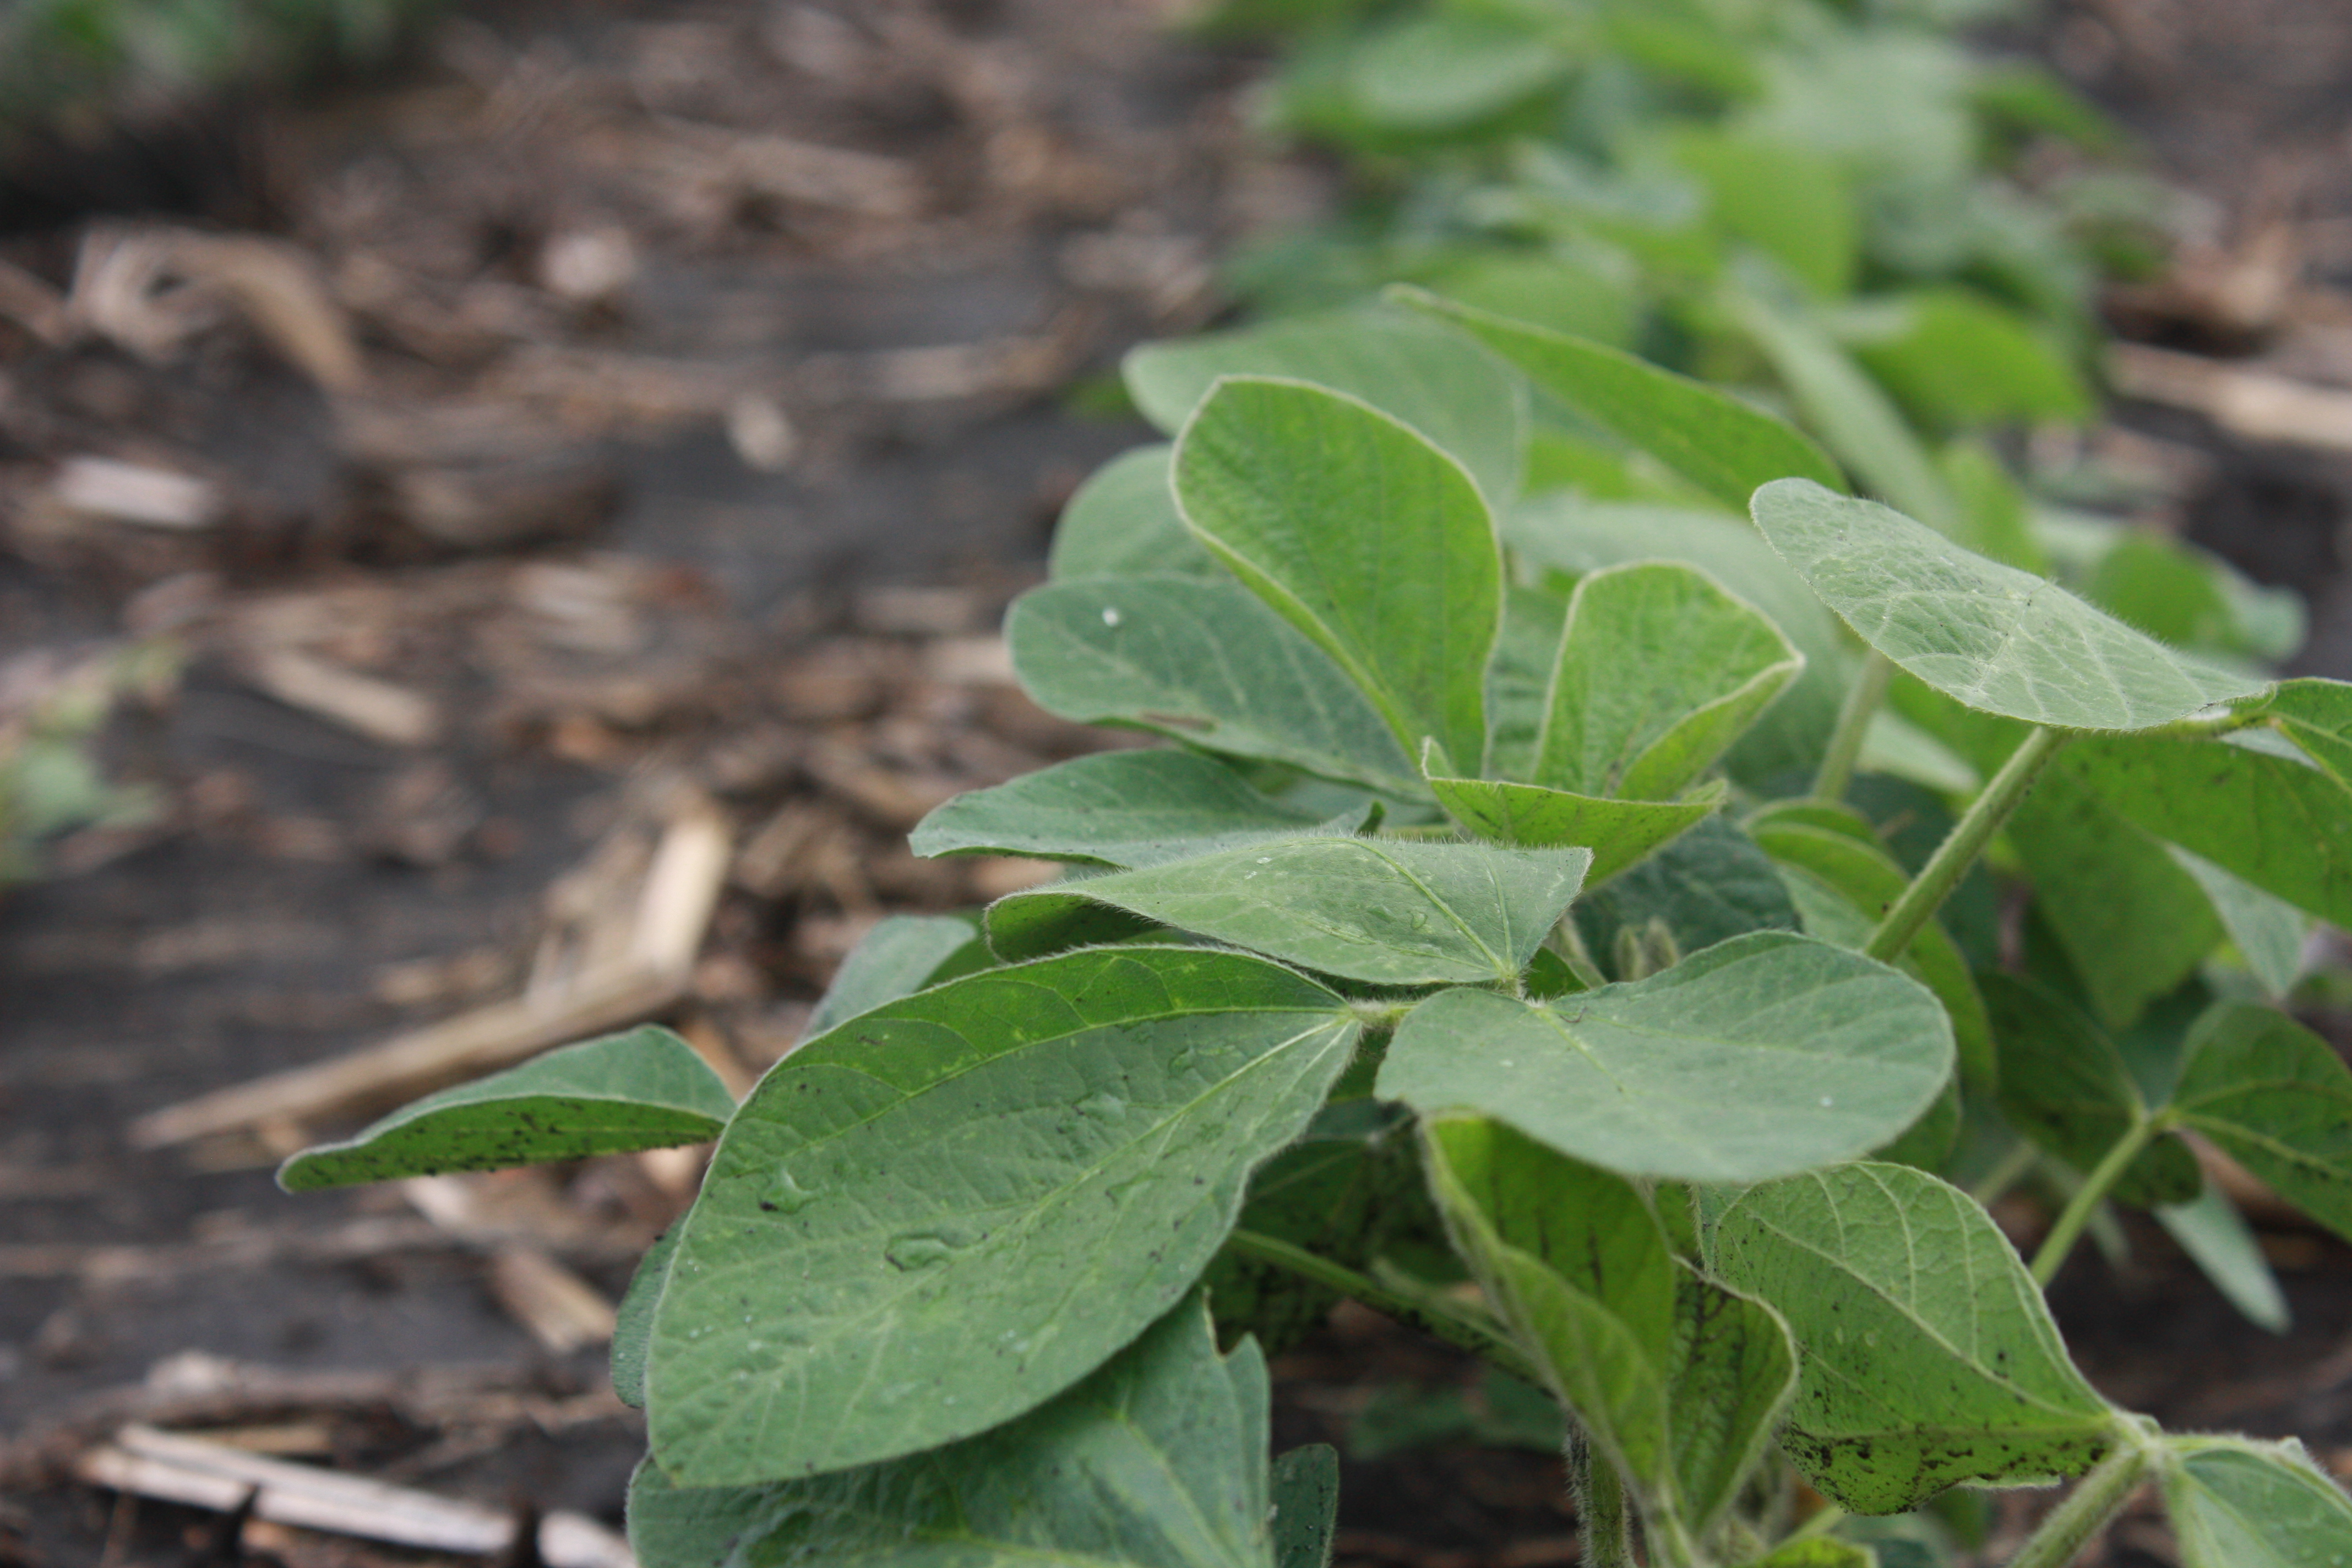 This agronomic image shows early season soybeans